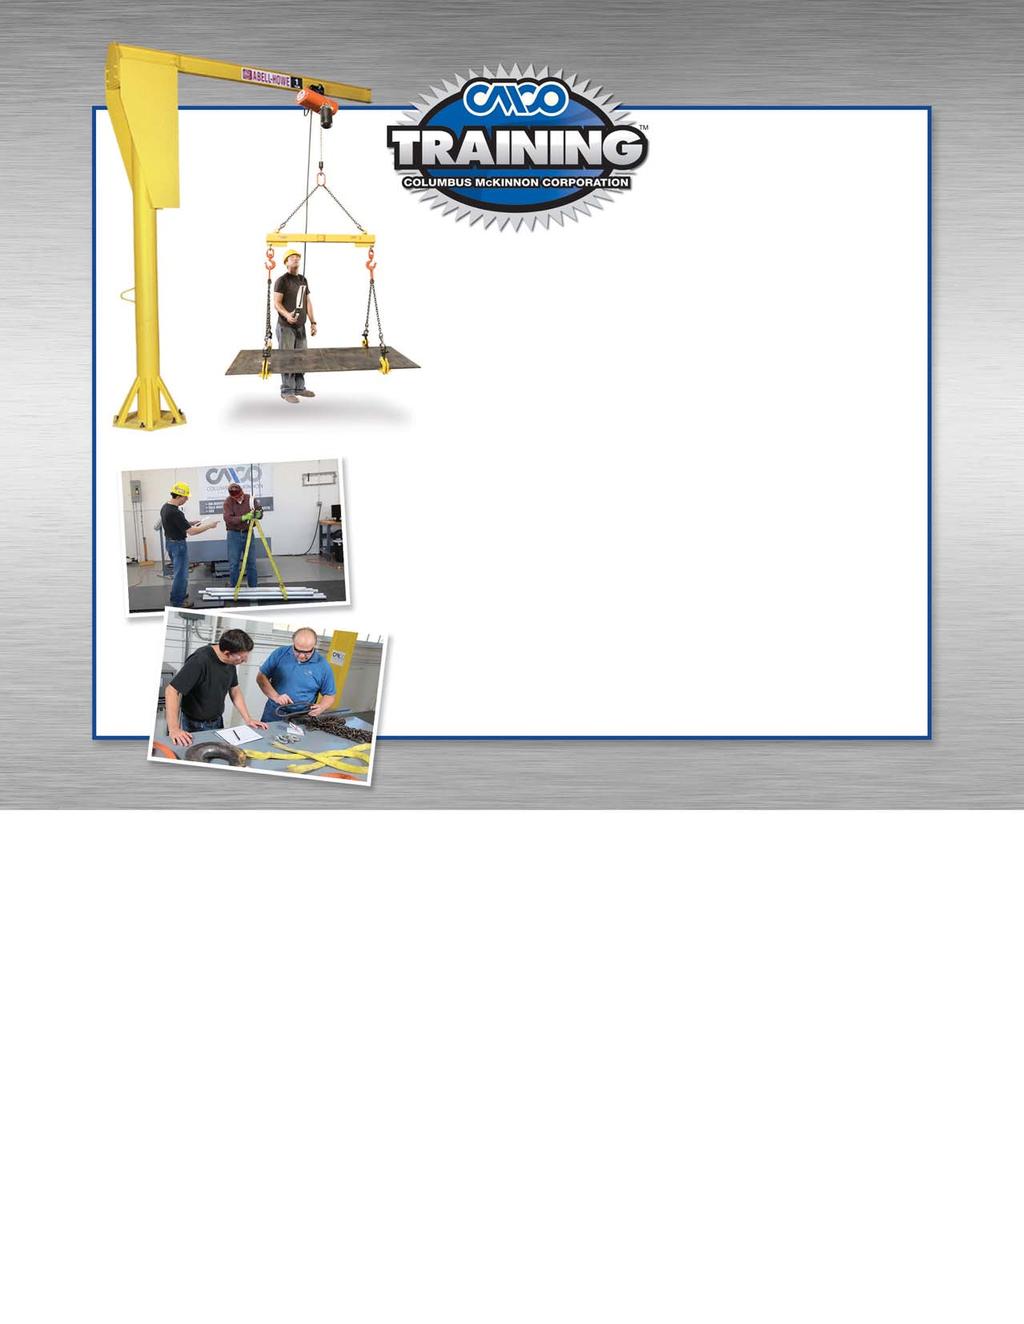 KOW HOW...KOW WHY Columbus McKinnon is a global leader in providing expertise and training in the proper use and inspection of rigging and overhead lifting equipment.